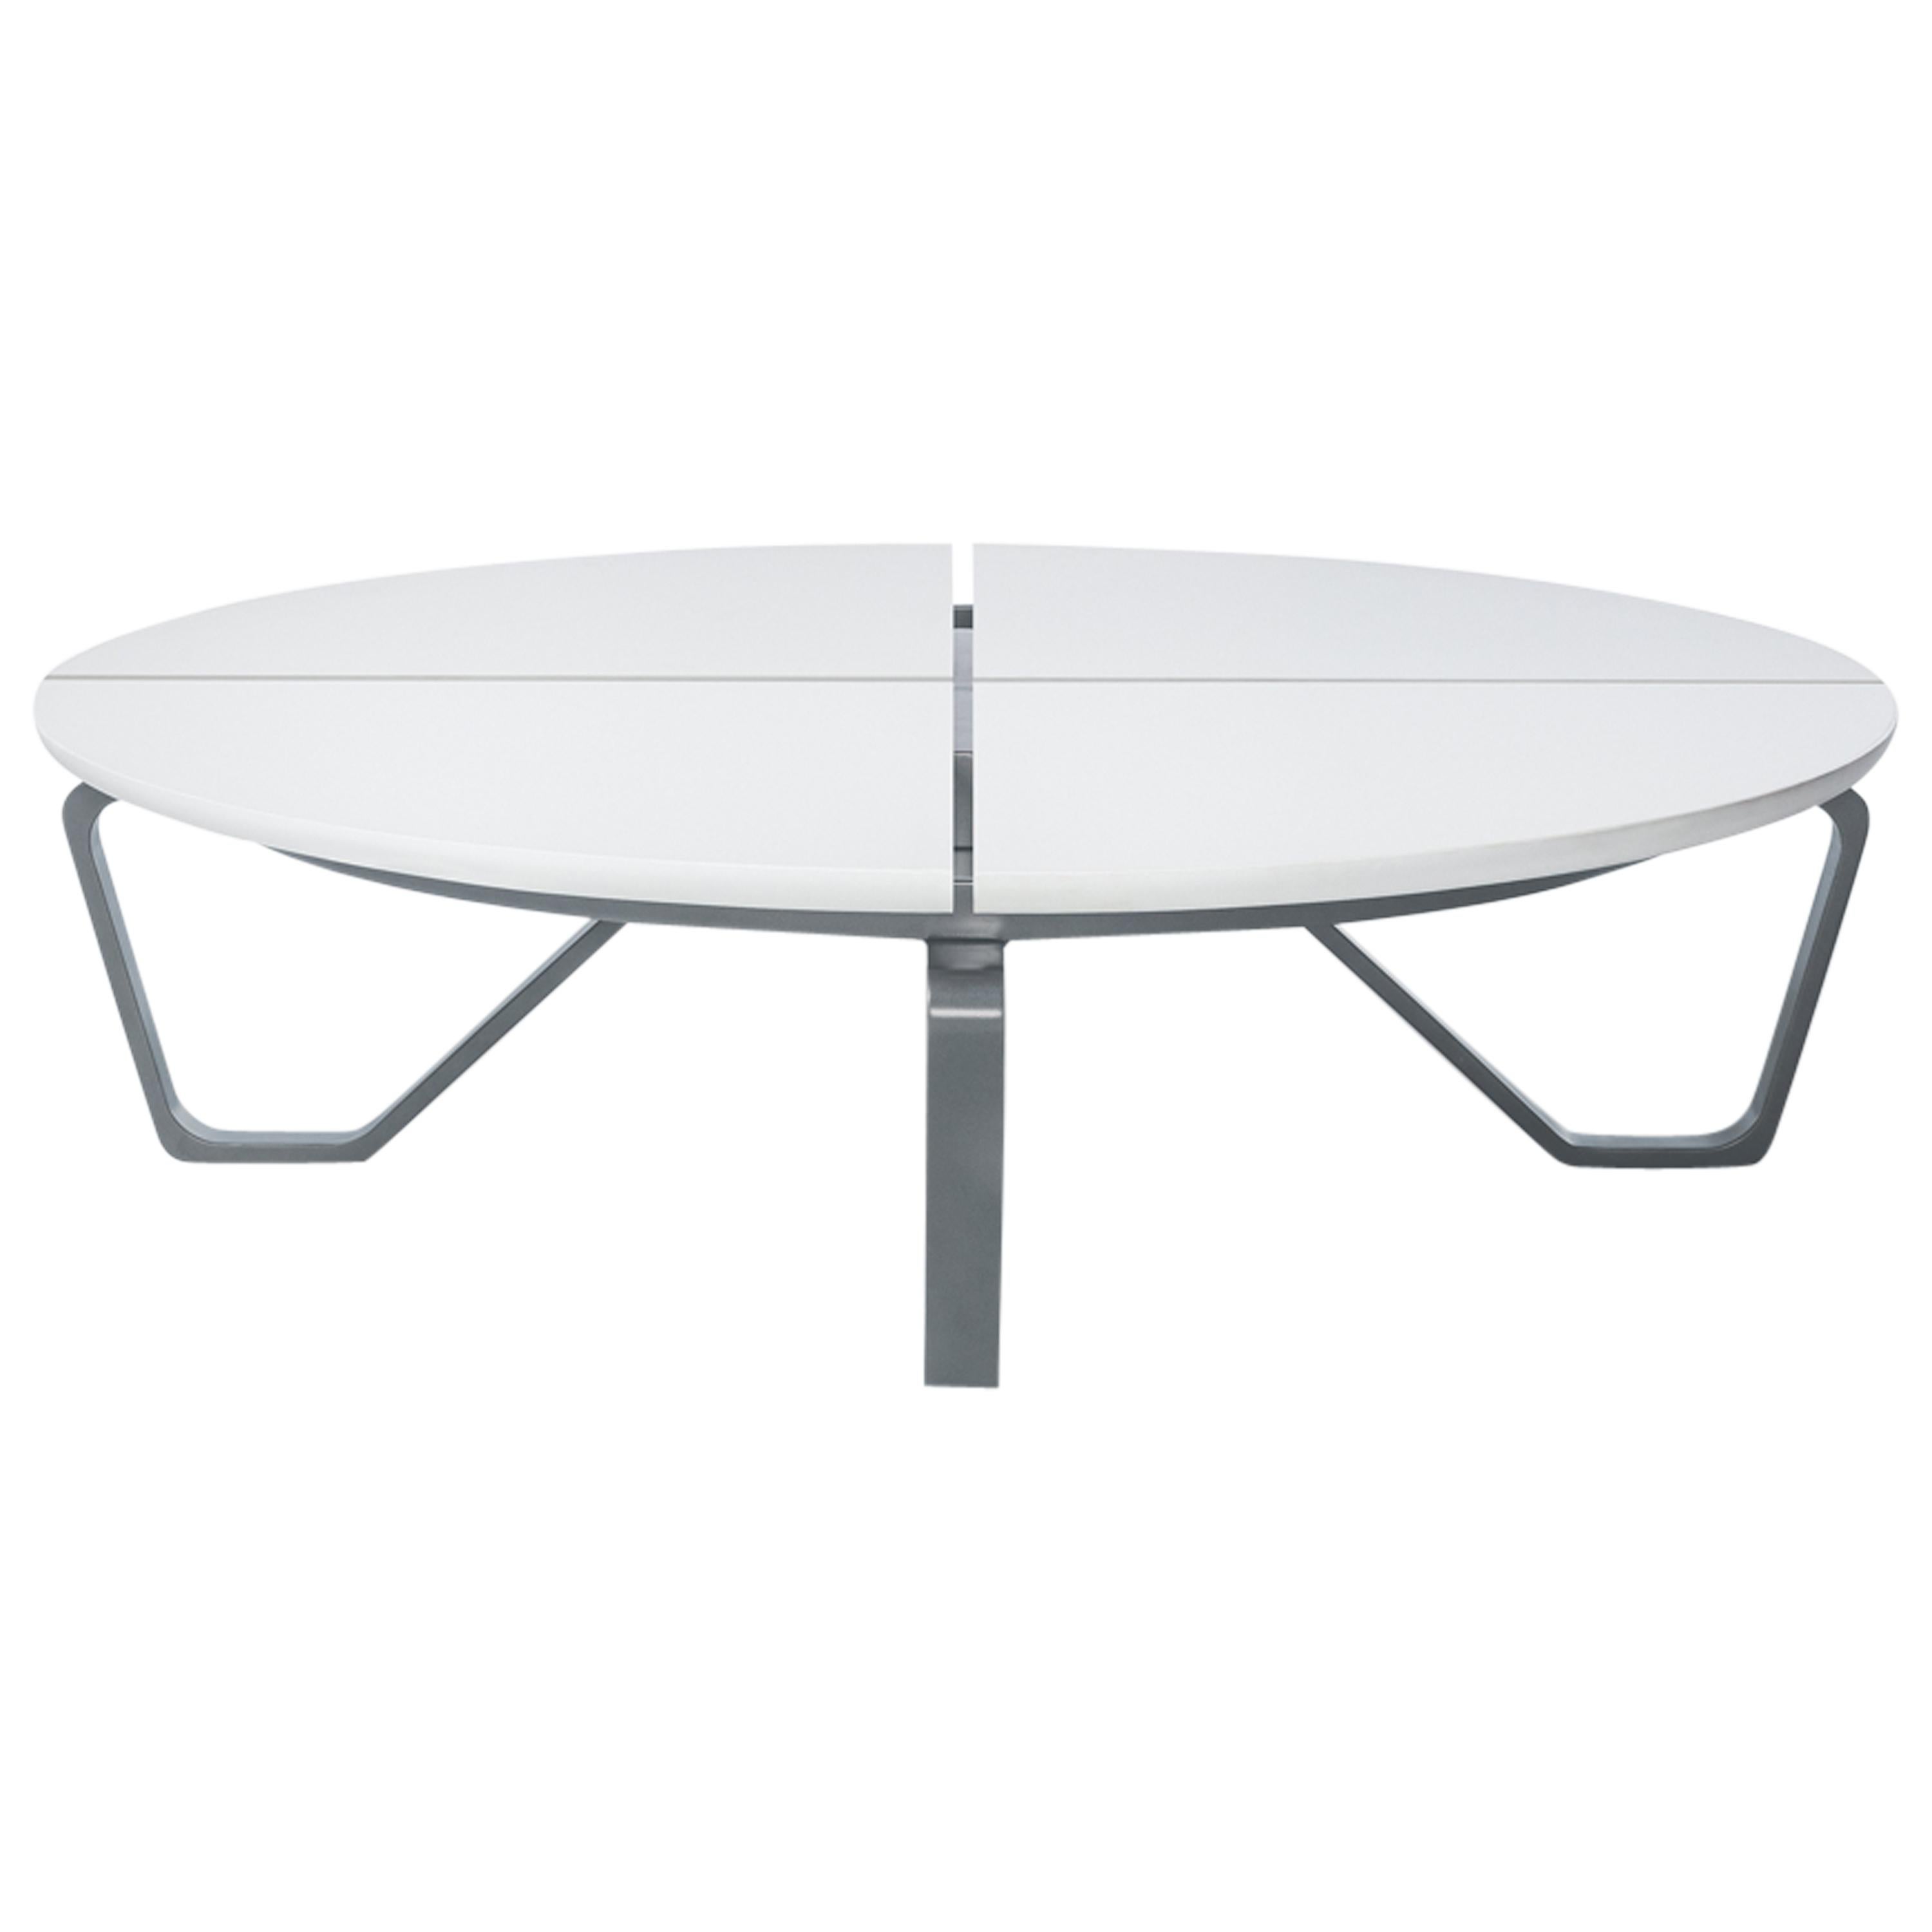 HOLLY HUNT Outdoor Meduse Round Cocktail Table in Oyster Metal & Pure White Top